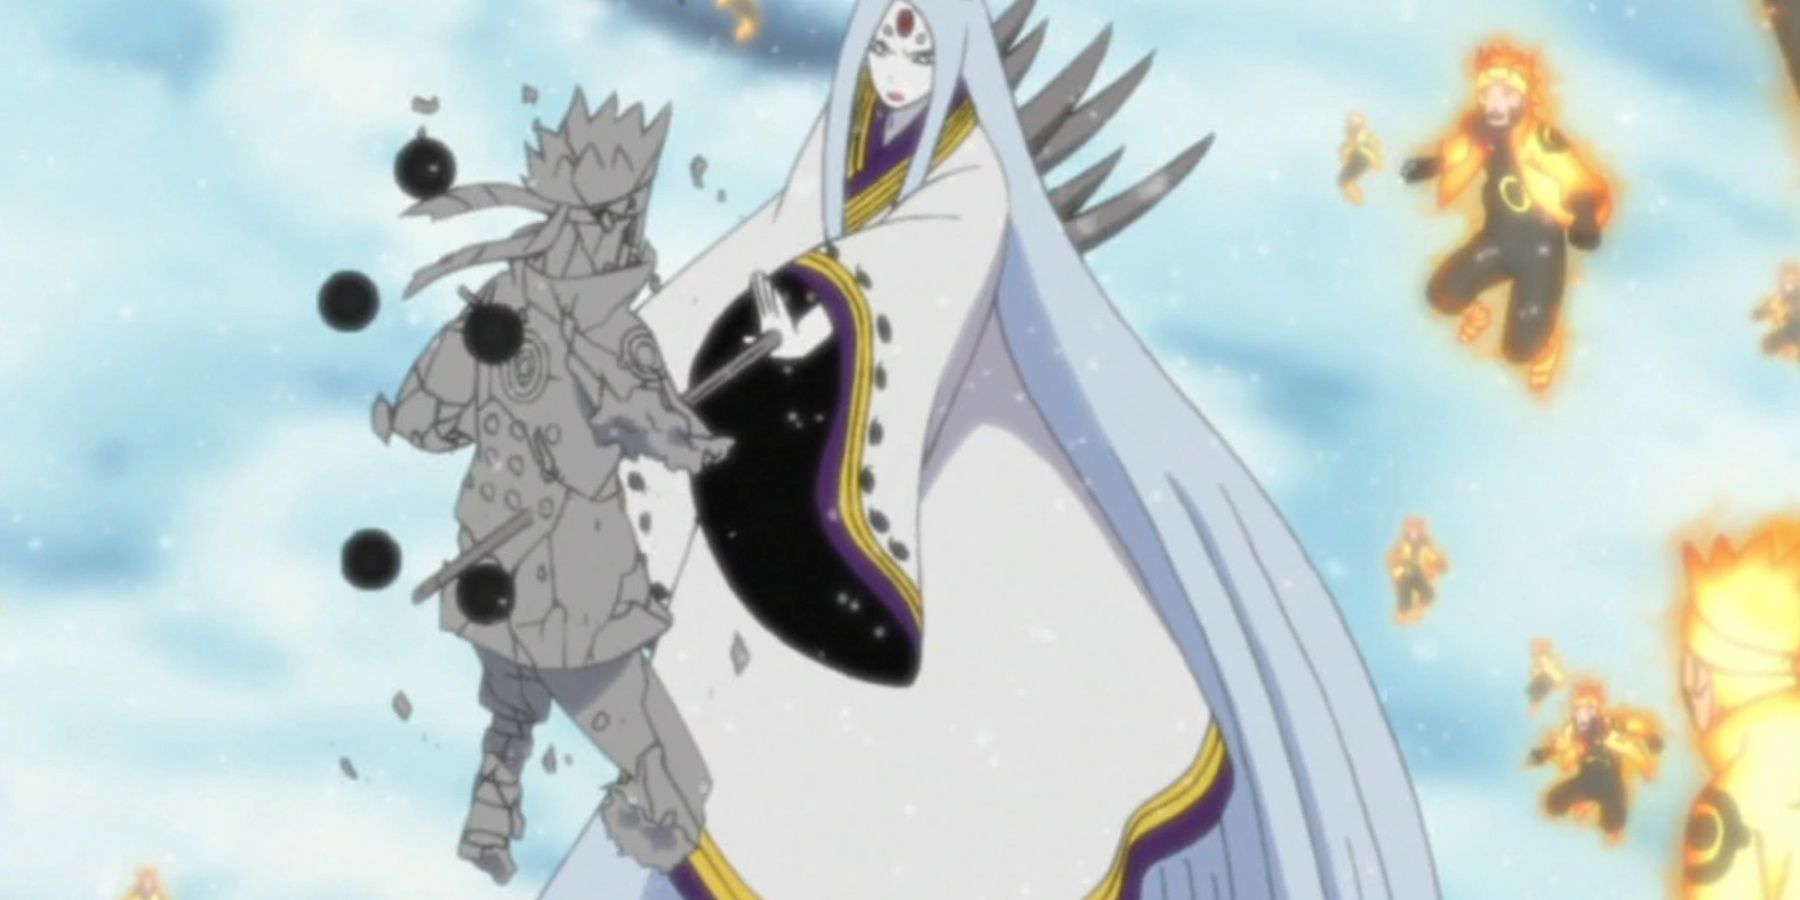 Kaguya using the All-Killing Ash Bones technique on one of Naruto's clones in Shippuden 